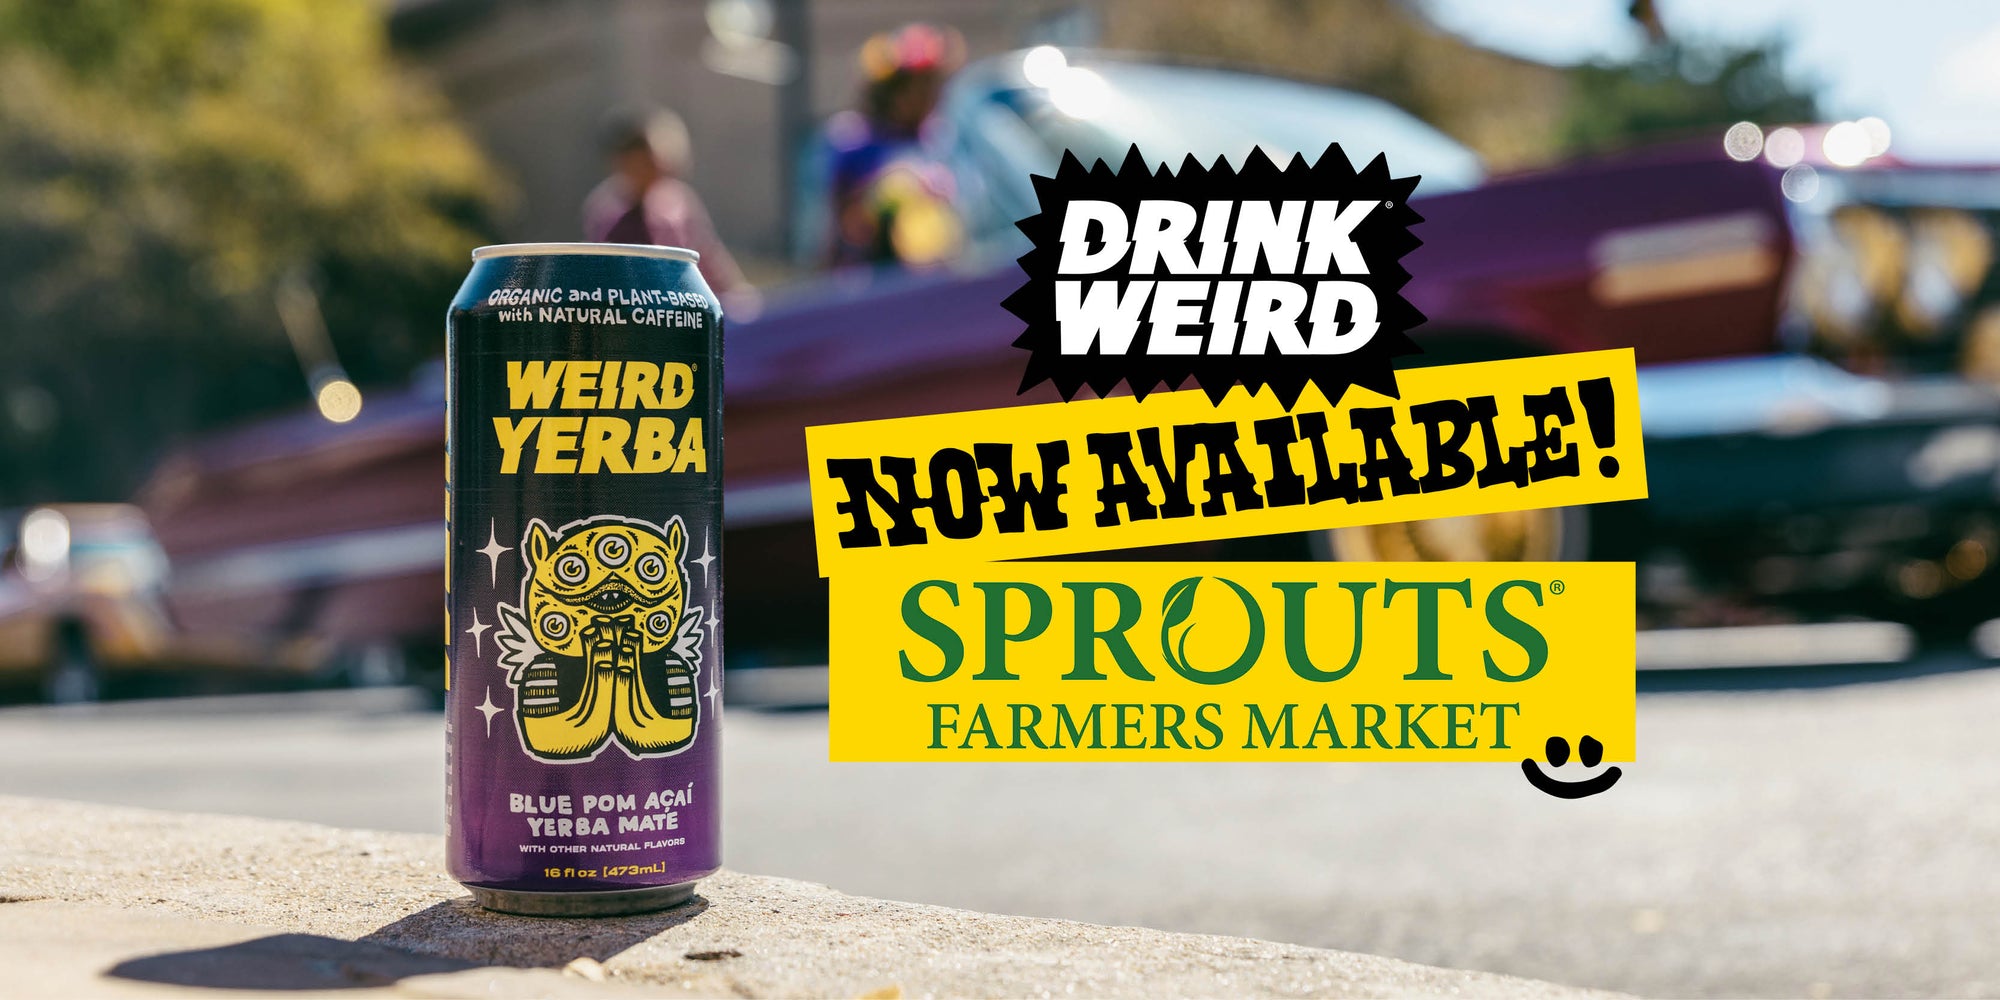 DRINK WEIRD Teas and Yerba at Sprouts EVERYWHERE!